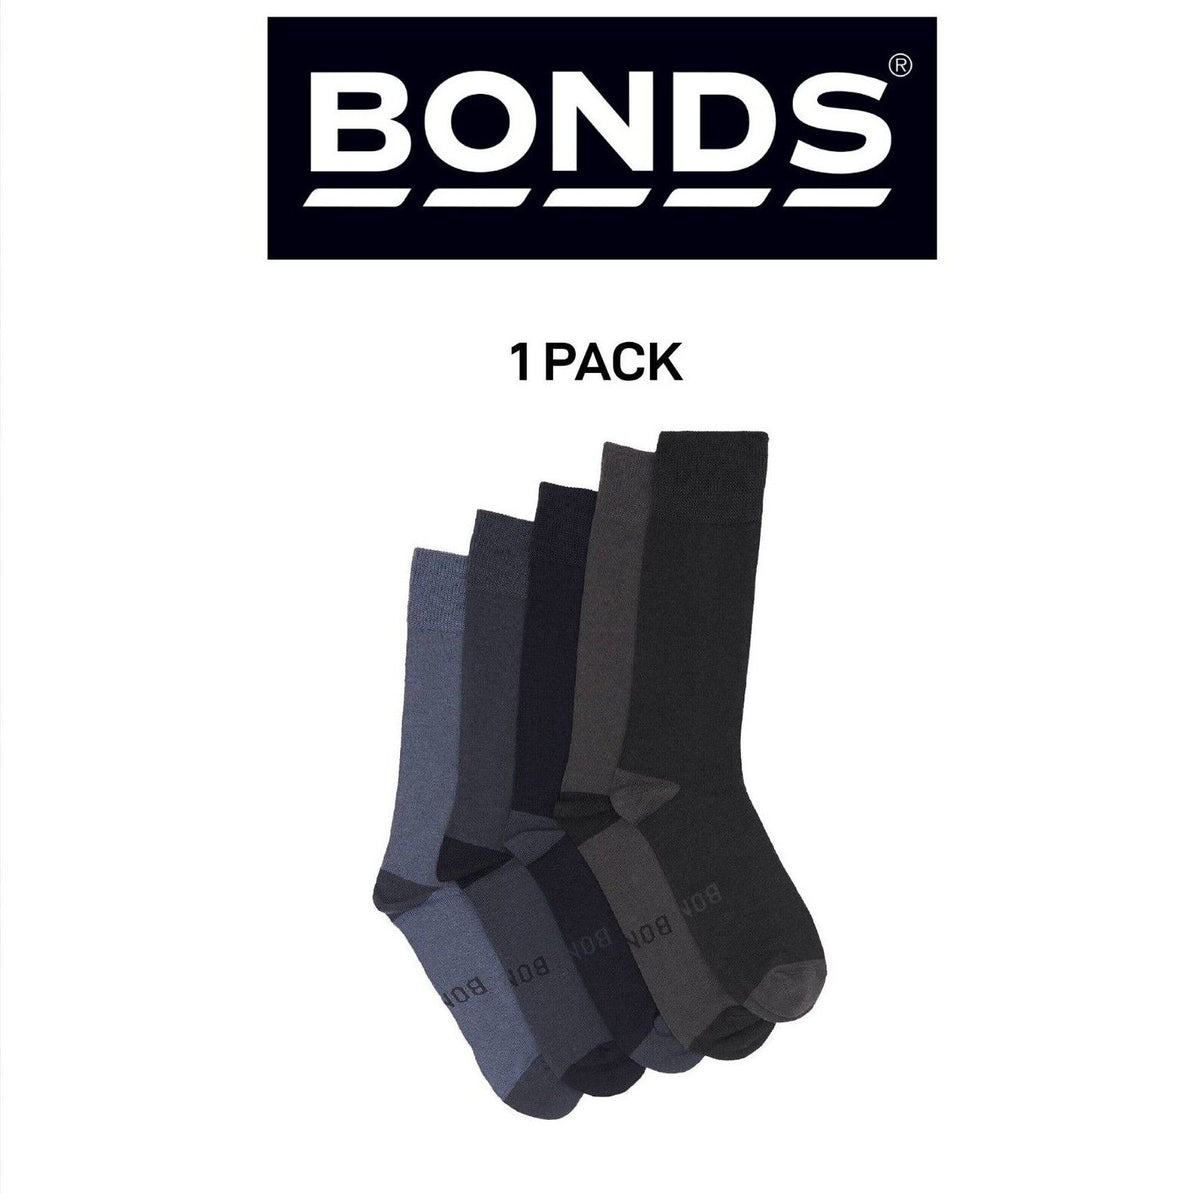 Bonds Mens Bamboo Crew Socks Fine Seams for Comfy Toes & Ankle Support SZFQ5W